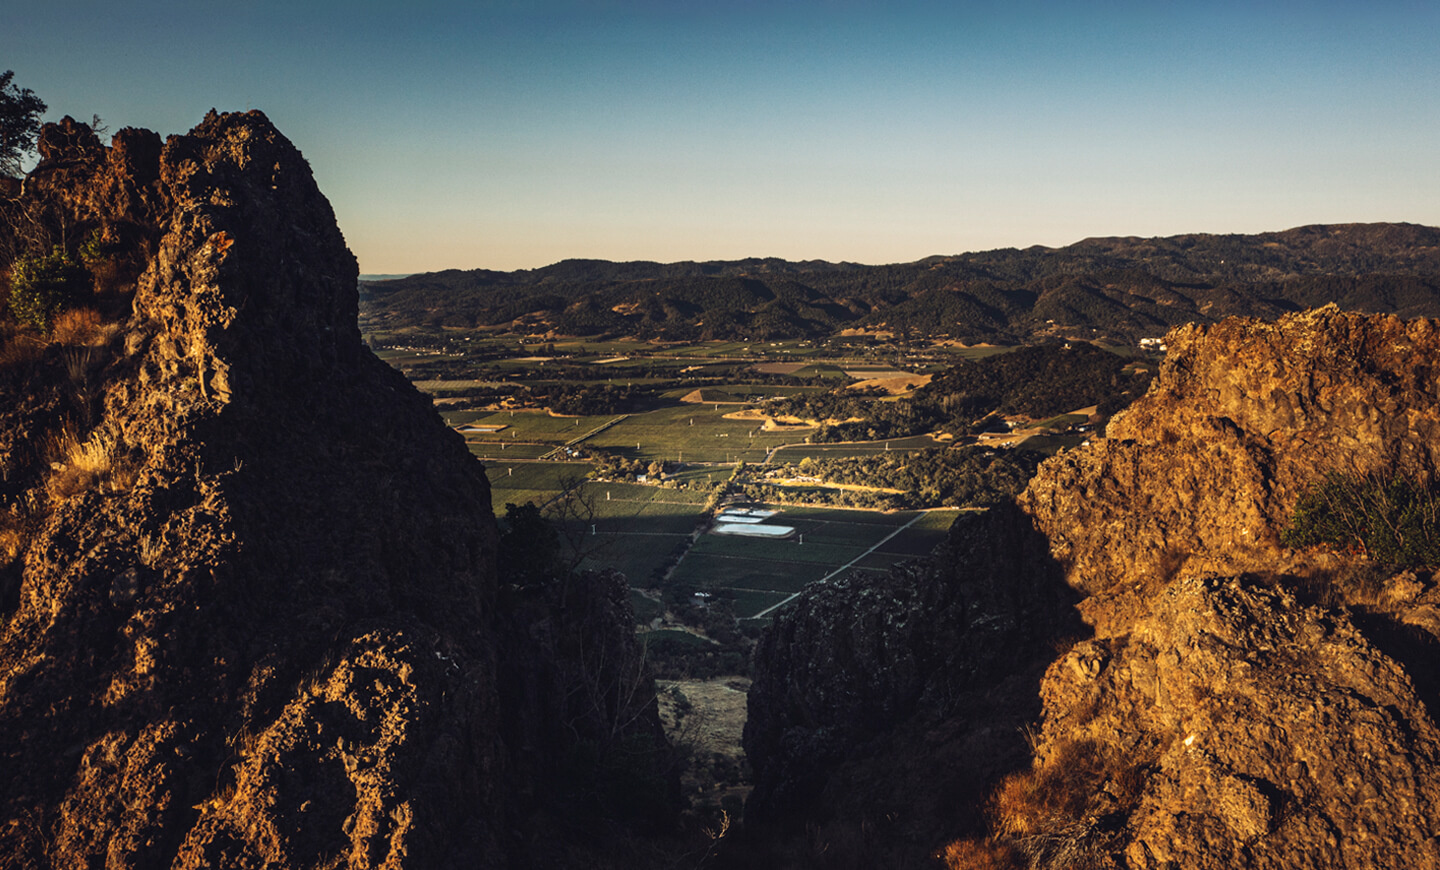 Aerial View of Stag's Leap Wine Cellars looking out at the vast vineyards at sunrise from between the peaks of the Stags Leap Palisades.